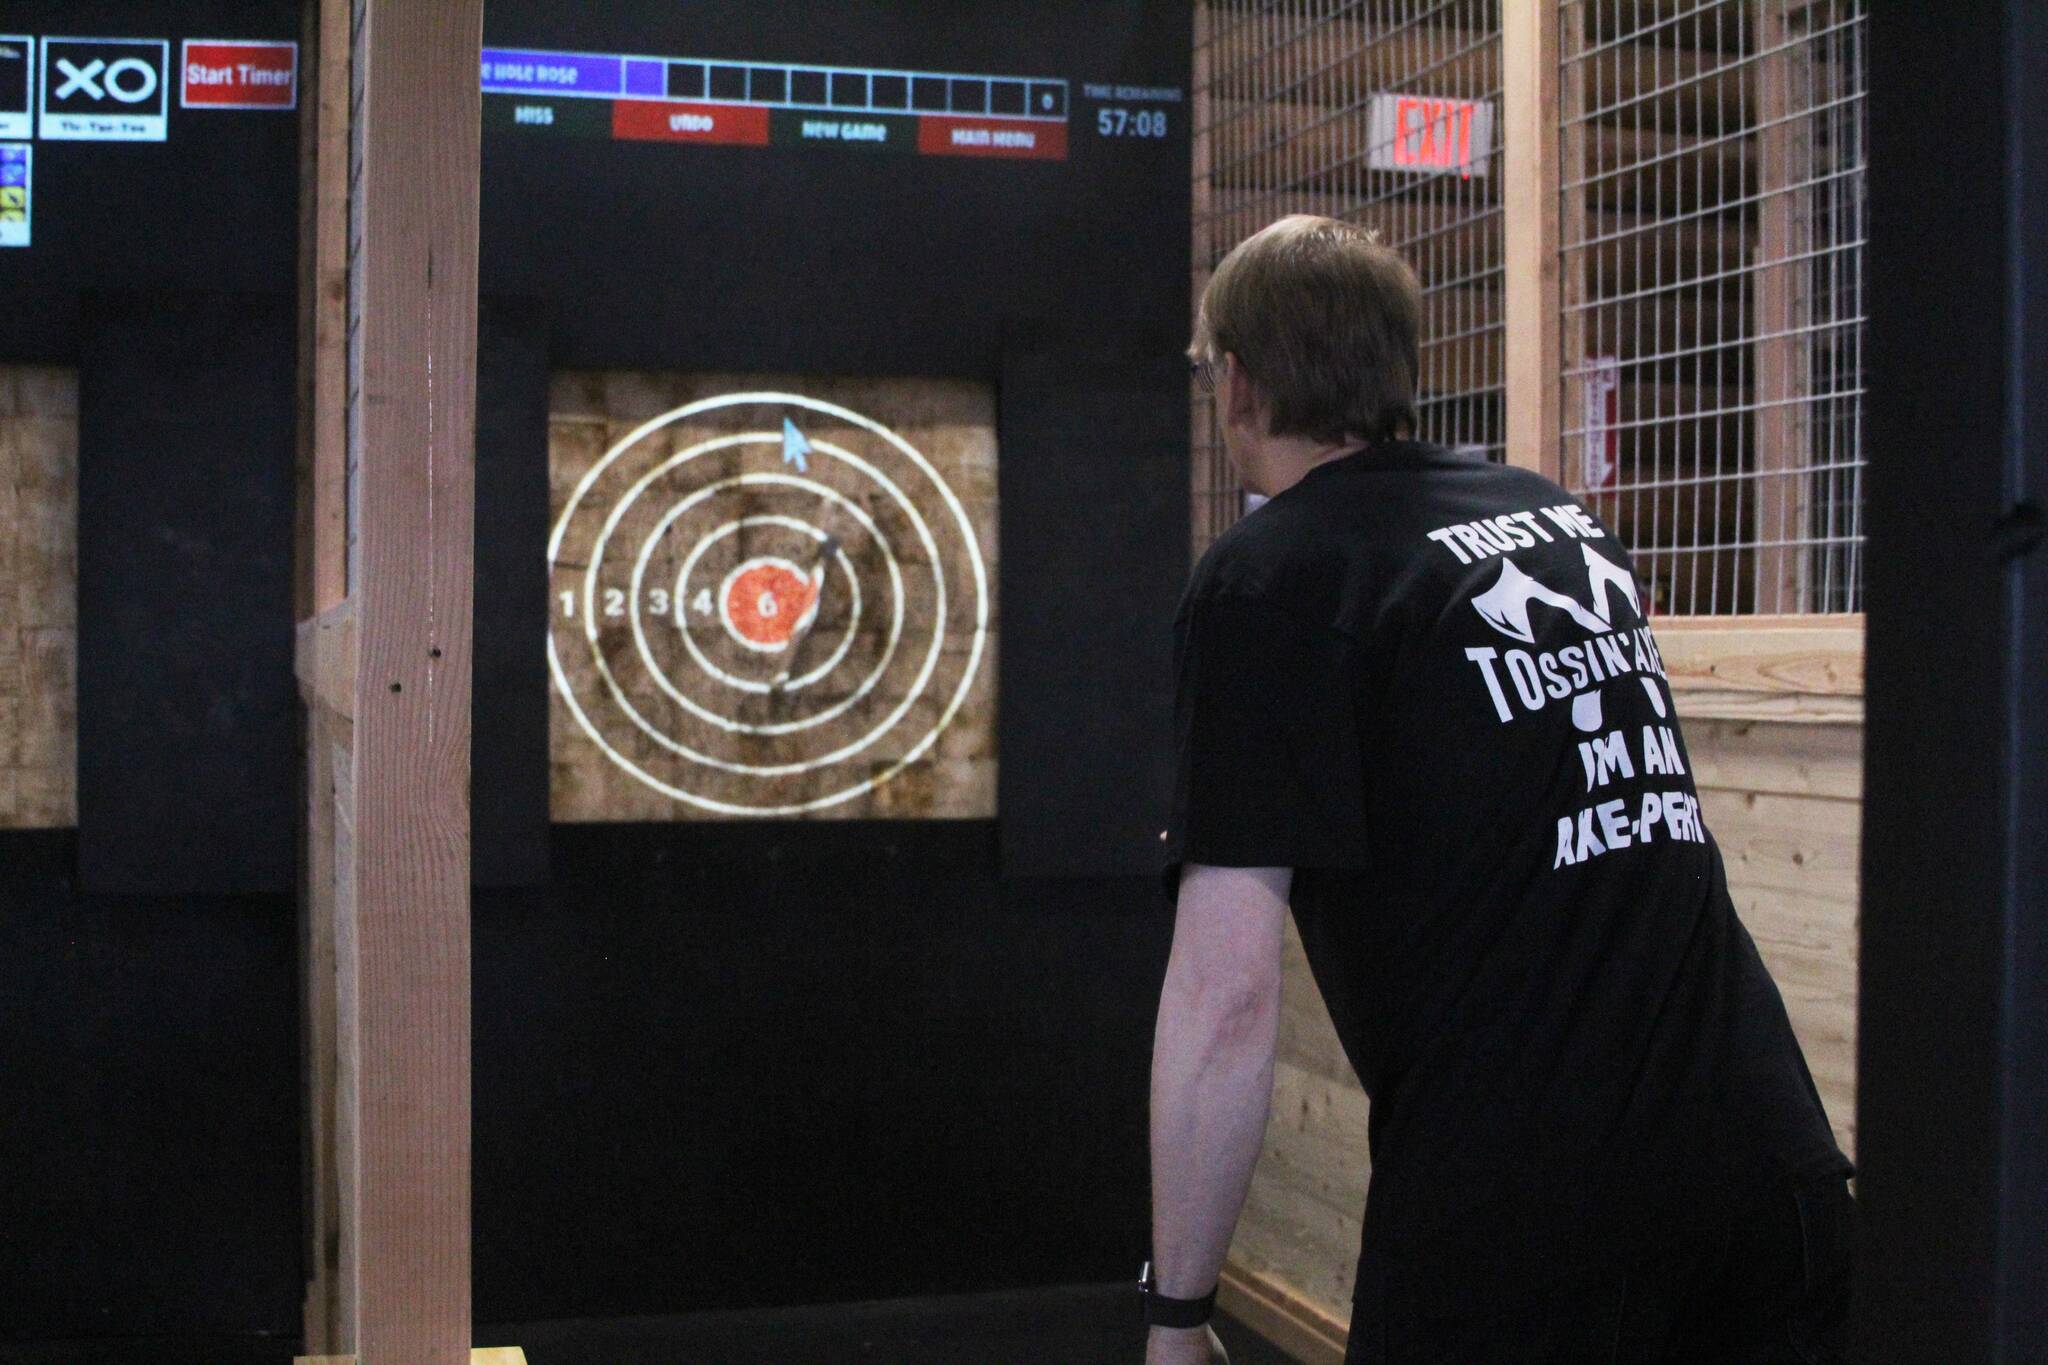 James Croft hits the bullseye. (Photo by Karina Andrew/Whidbey News-Times)